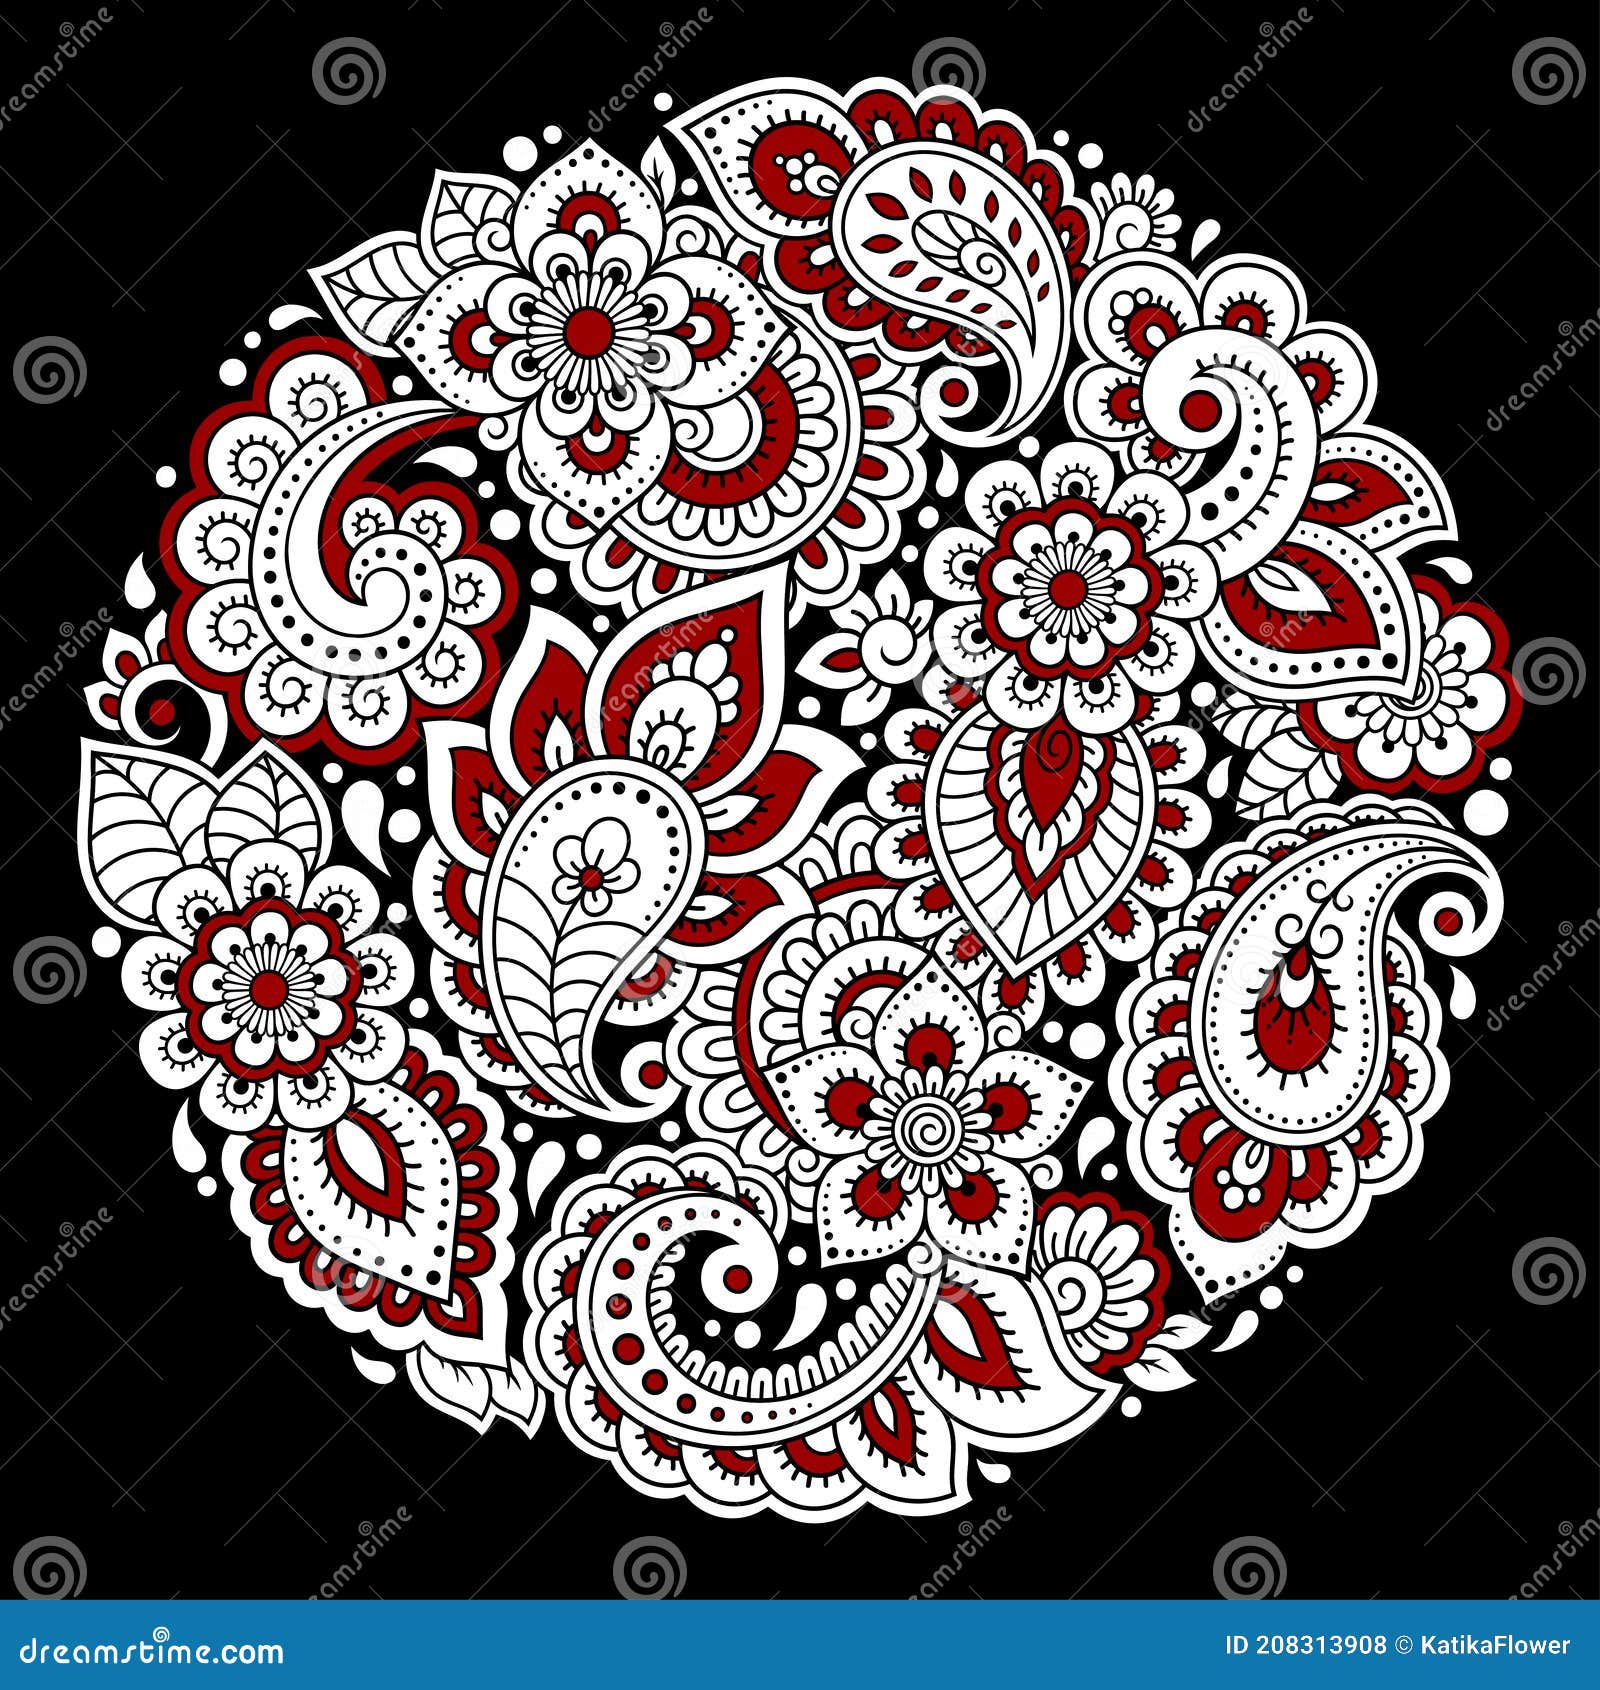 Outline round floral pattern for coloring the book page